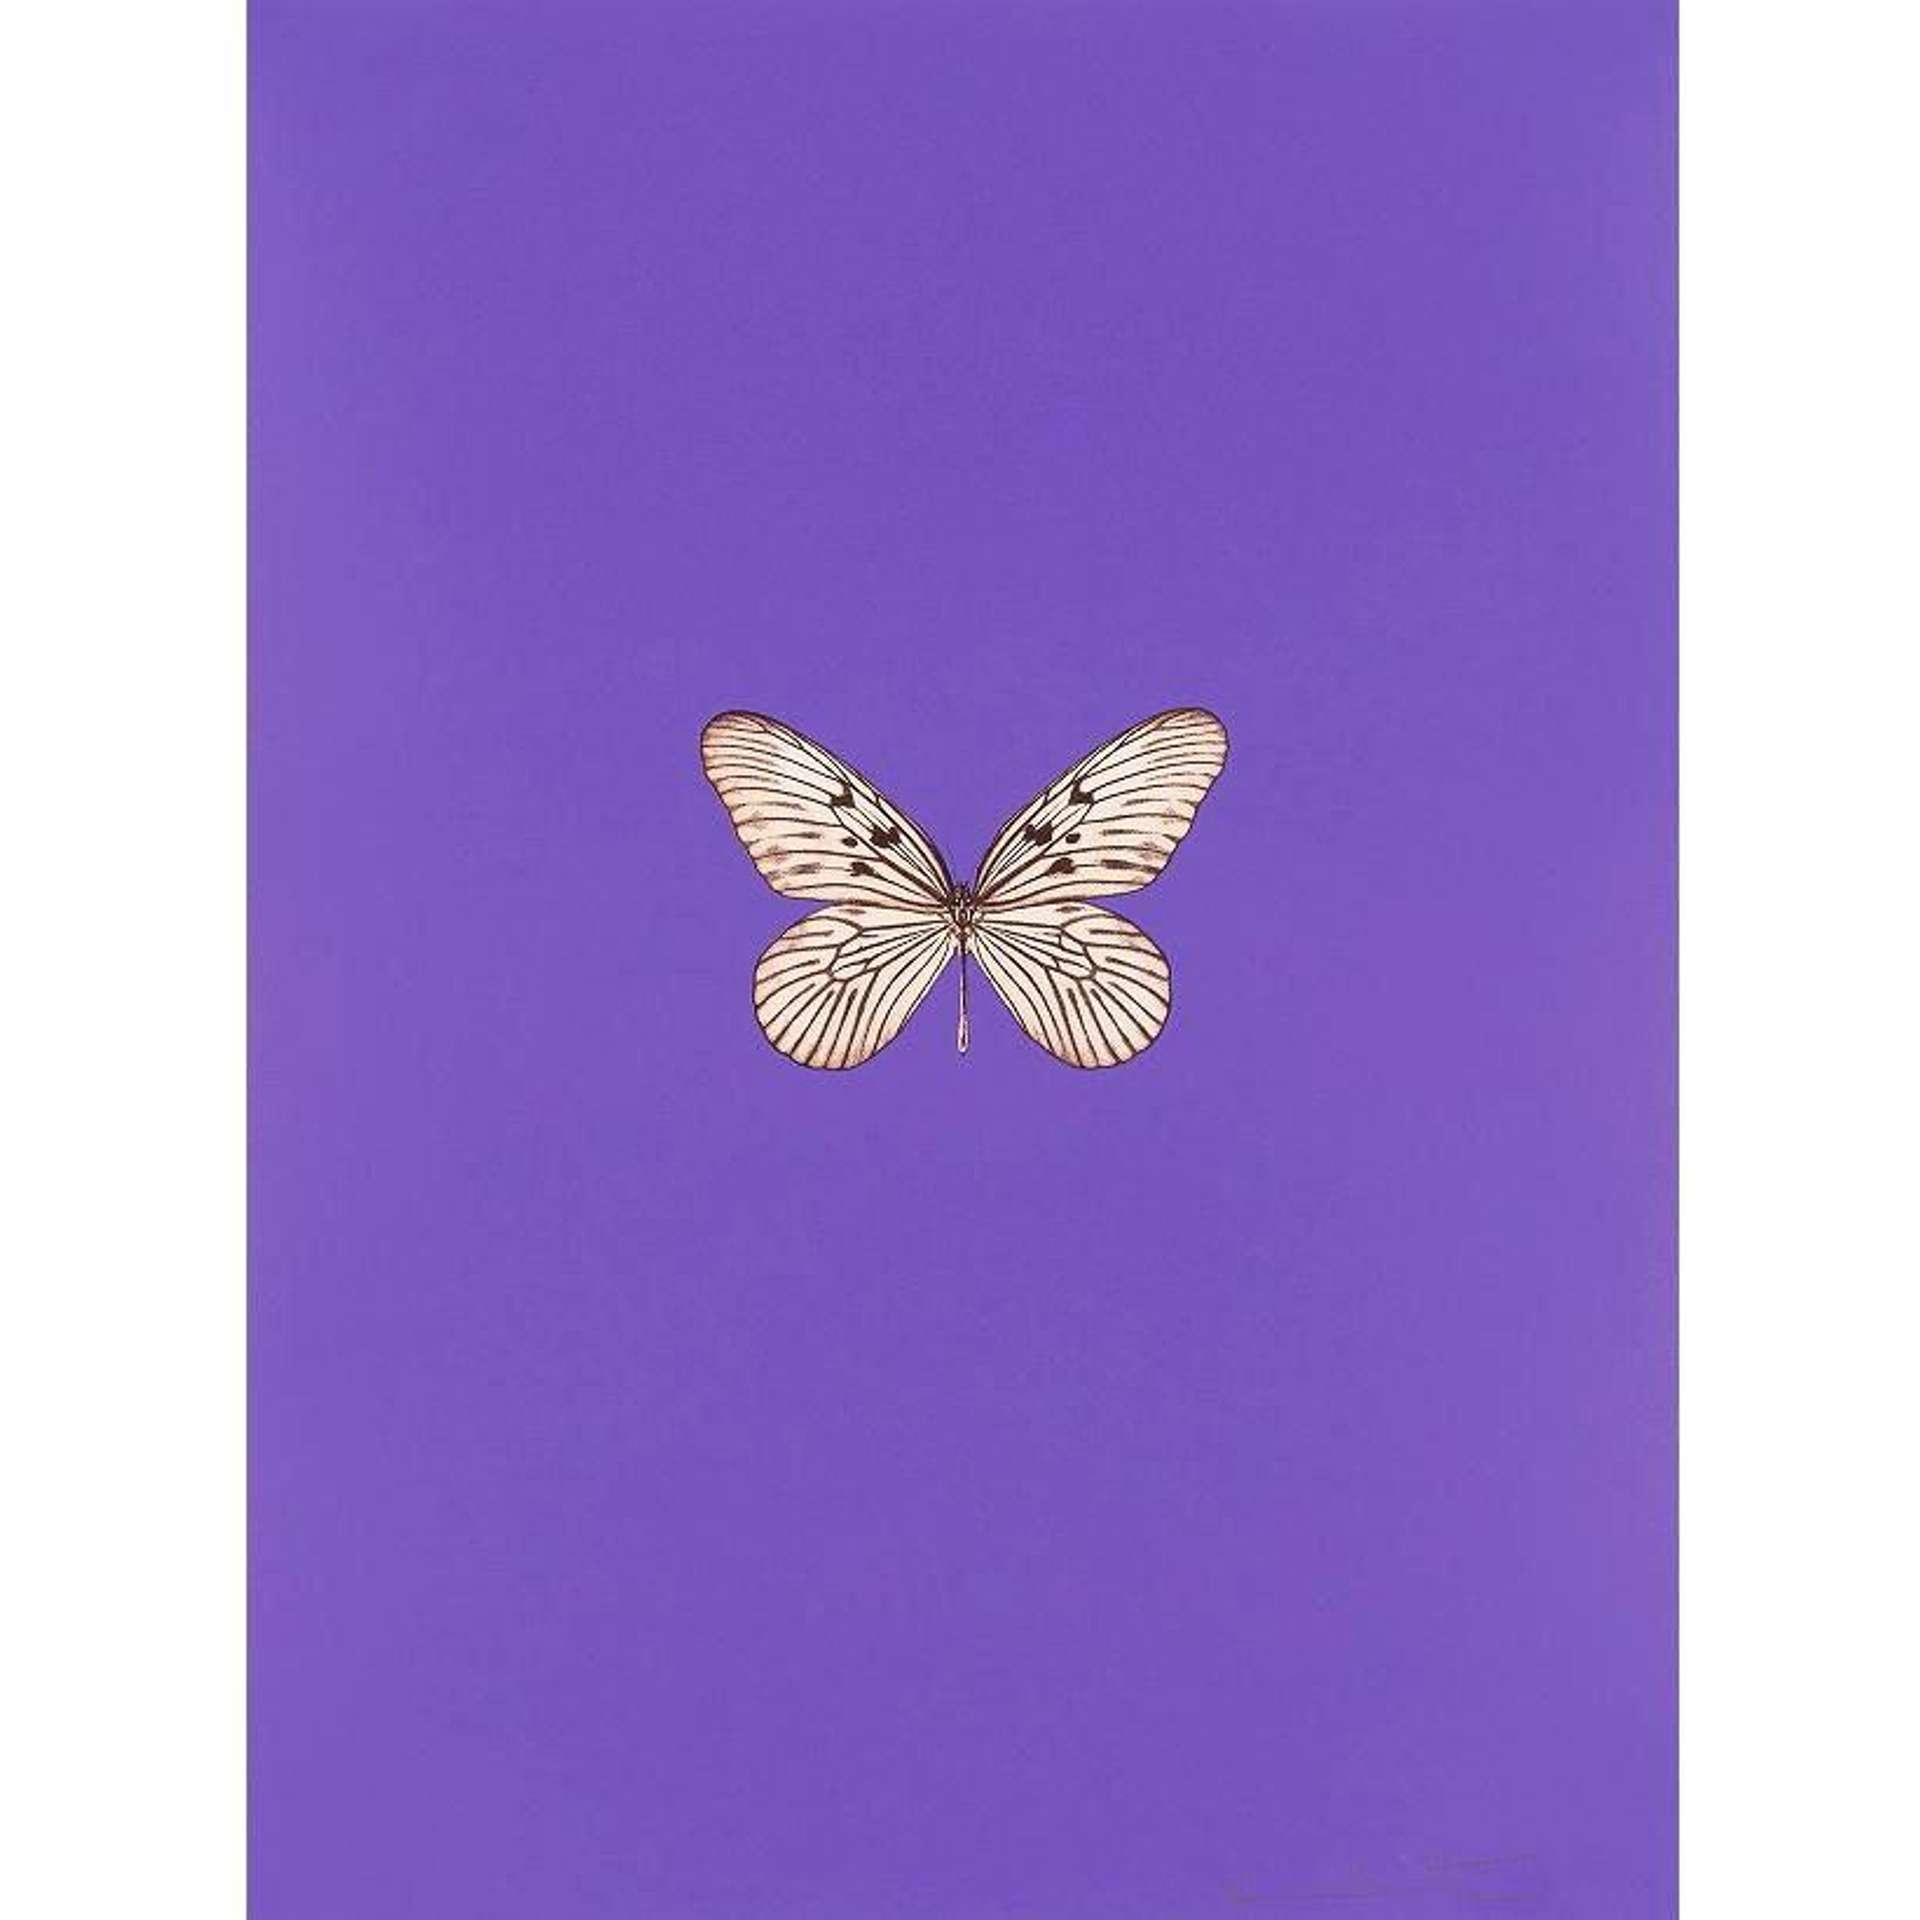 It's A Beautiful Day 1 - Signed Print by Damien Hirst 2013 - MyArtBroker